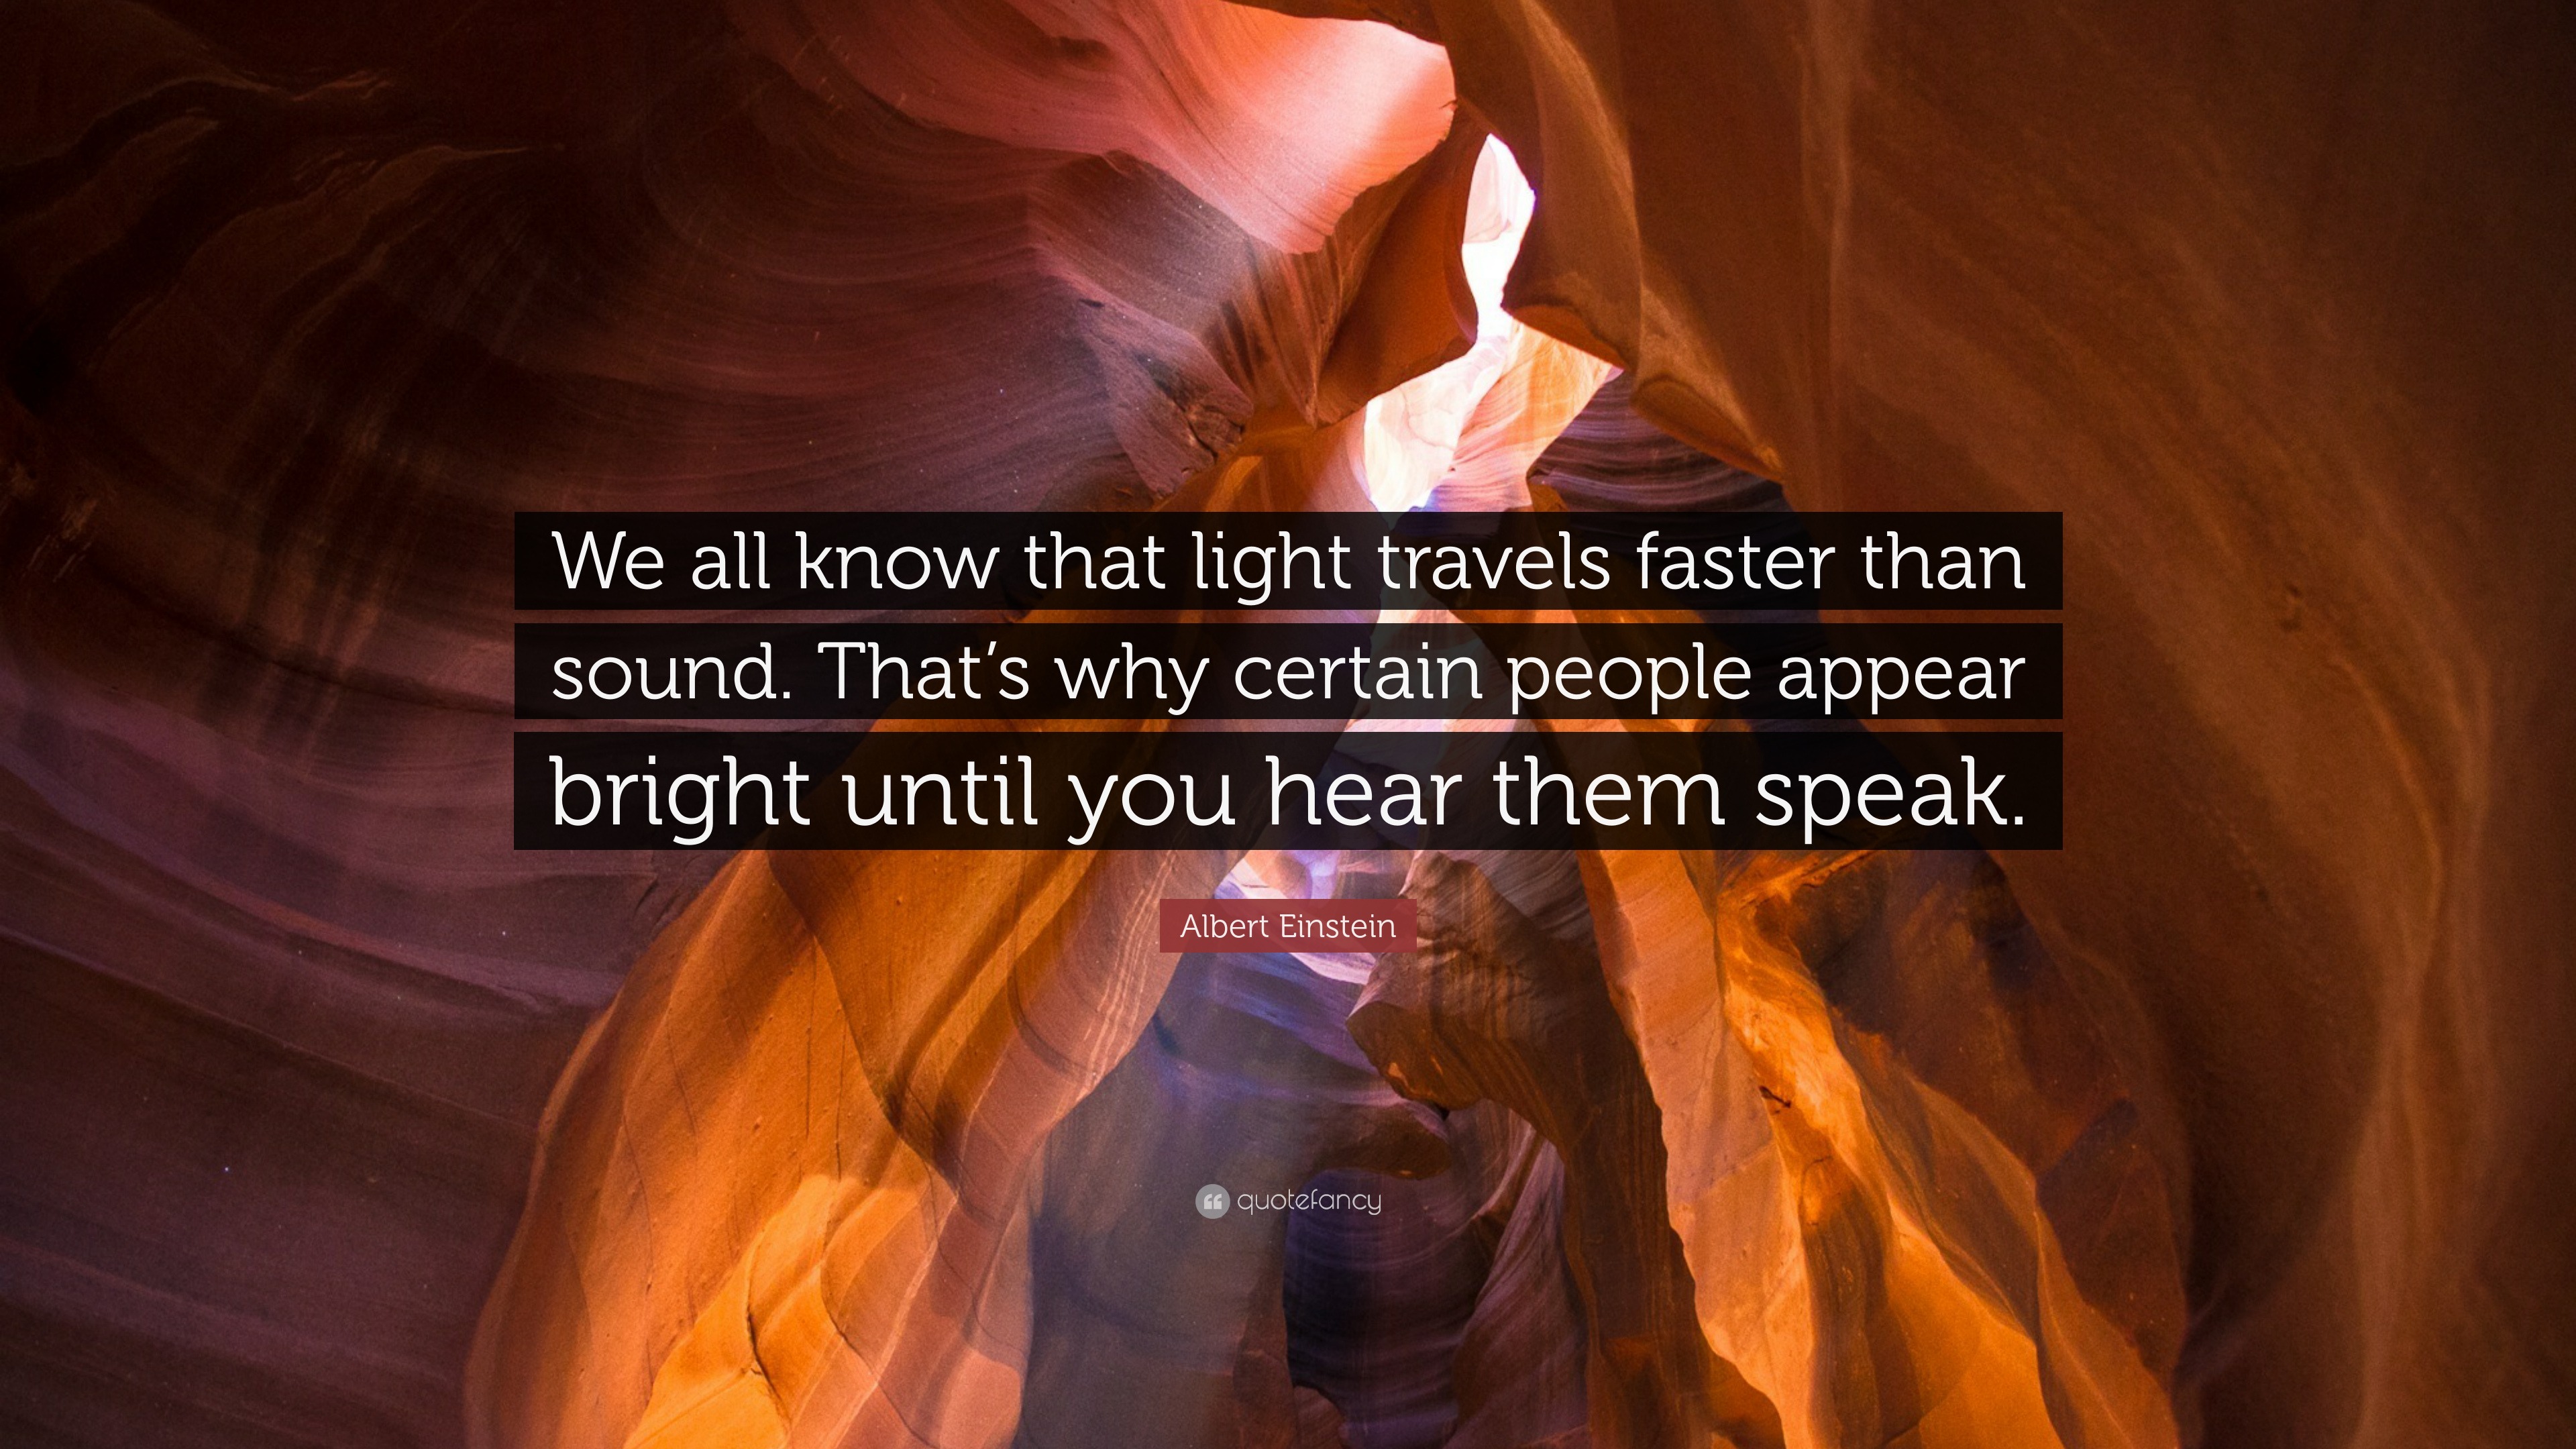 sound travels faster than light